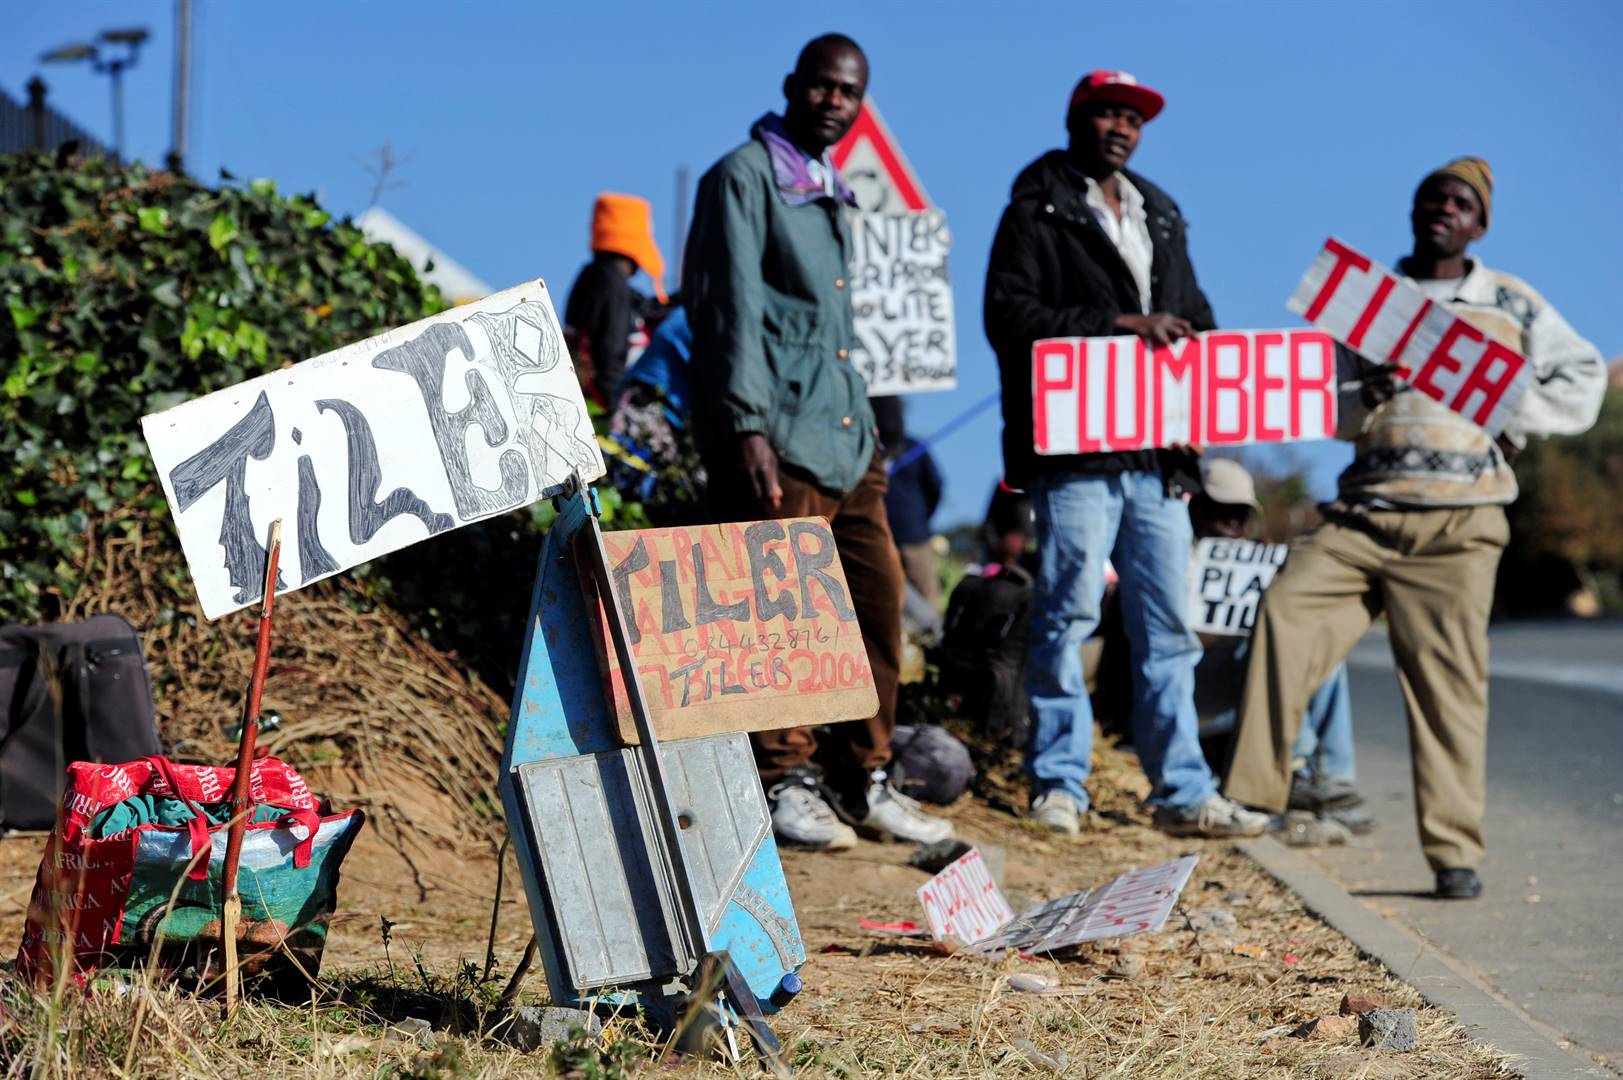 HARD CHOICE The writer argues that President Cyril Ramaphosa’s dream should be seen in the light of generating growth through an expanding middle class, while at the same time tackling the harsh realities experienced by the poor masses and the working class. Picture: Herman Verwey